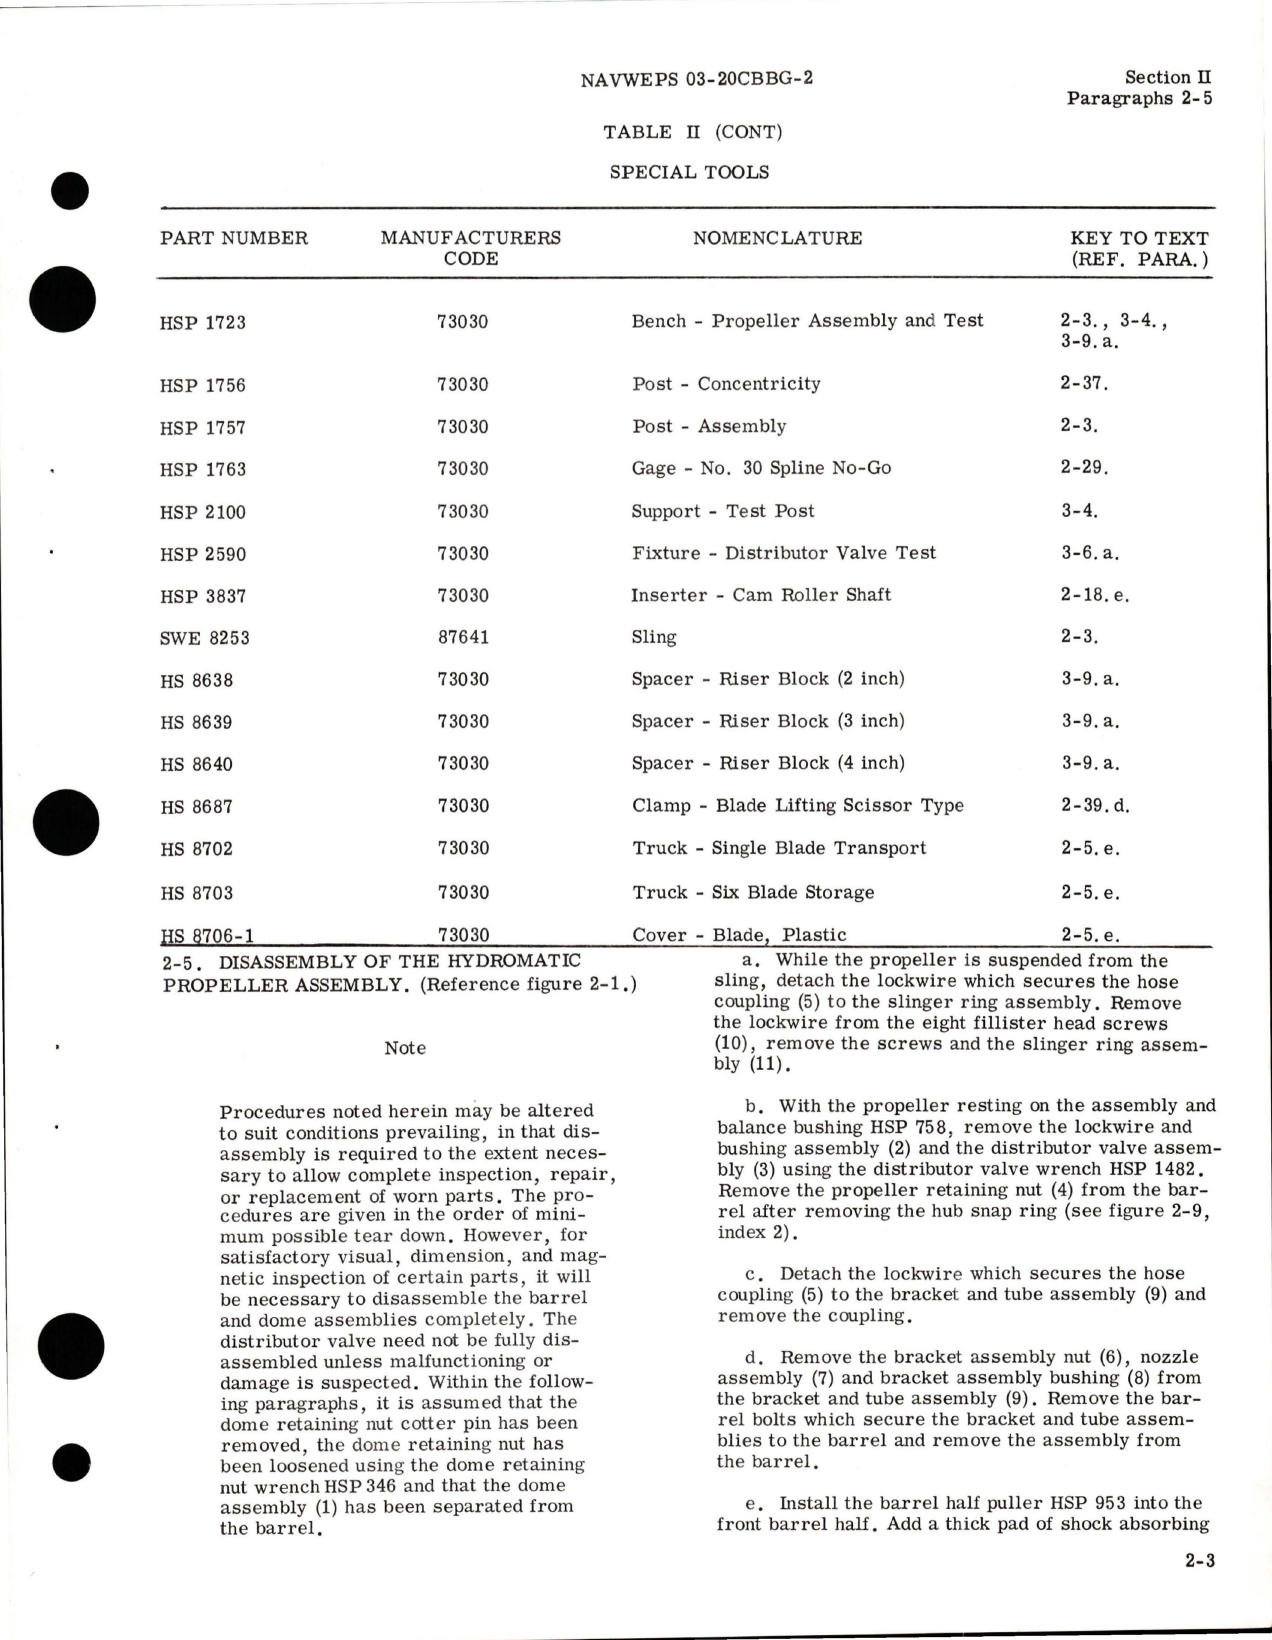 Sample page 9 from AirCorps Library document: Overhaul Instructions for Variable Pitch Propeller - 22D30-305, 22D30-307, and 22D30-317